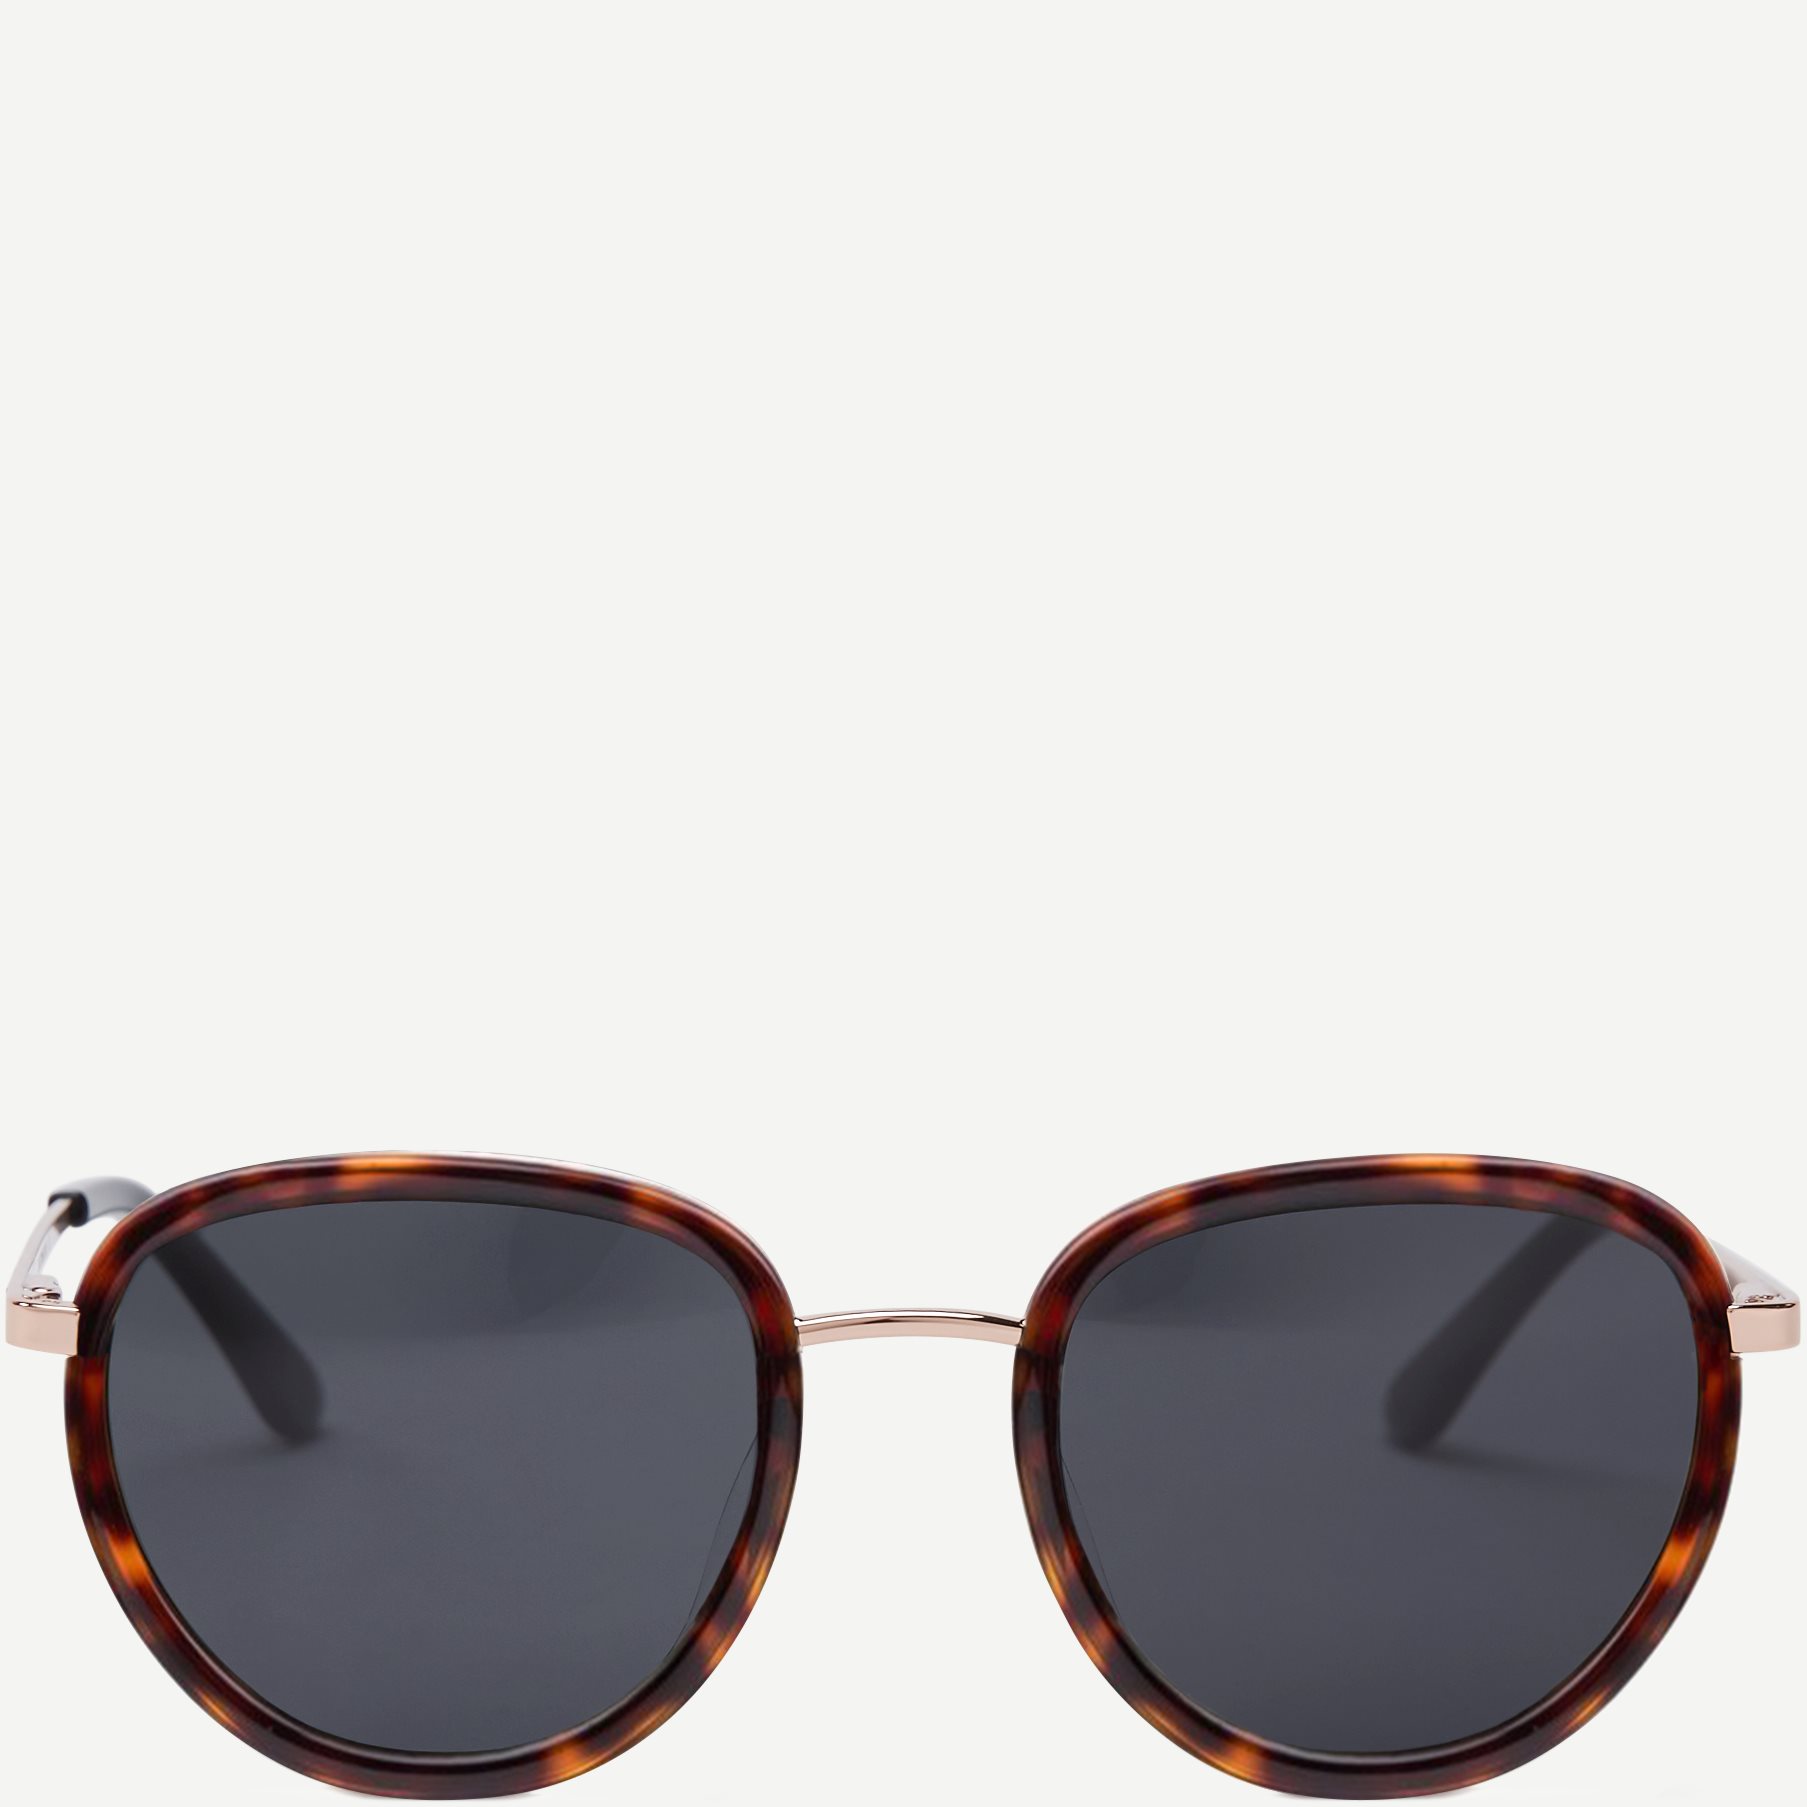 Governor Sunglasses - Accessories - Brown